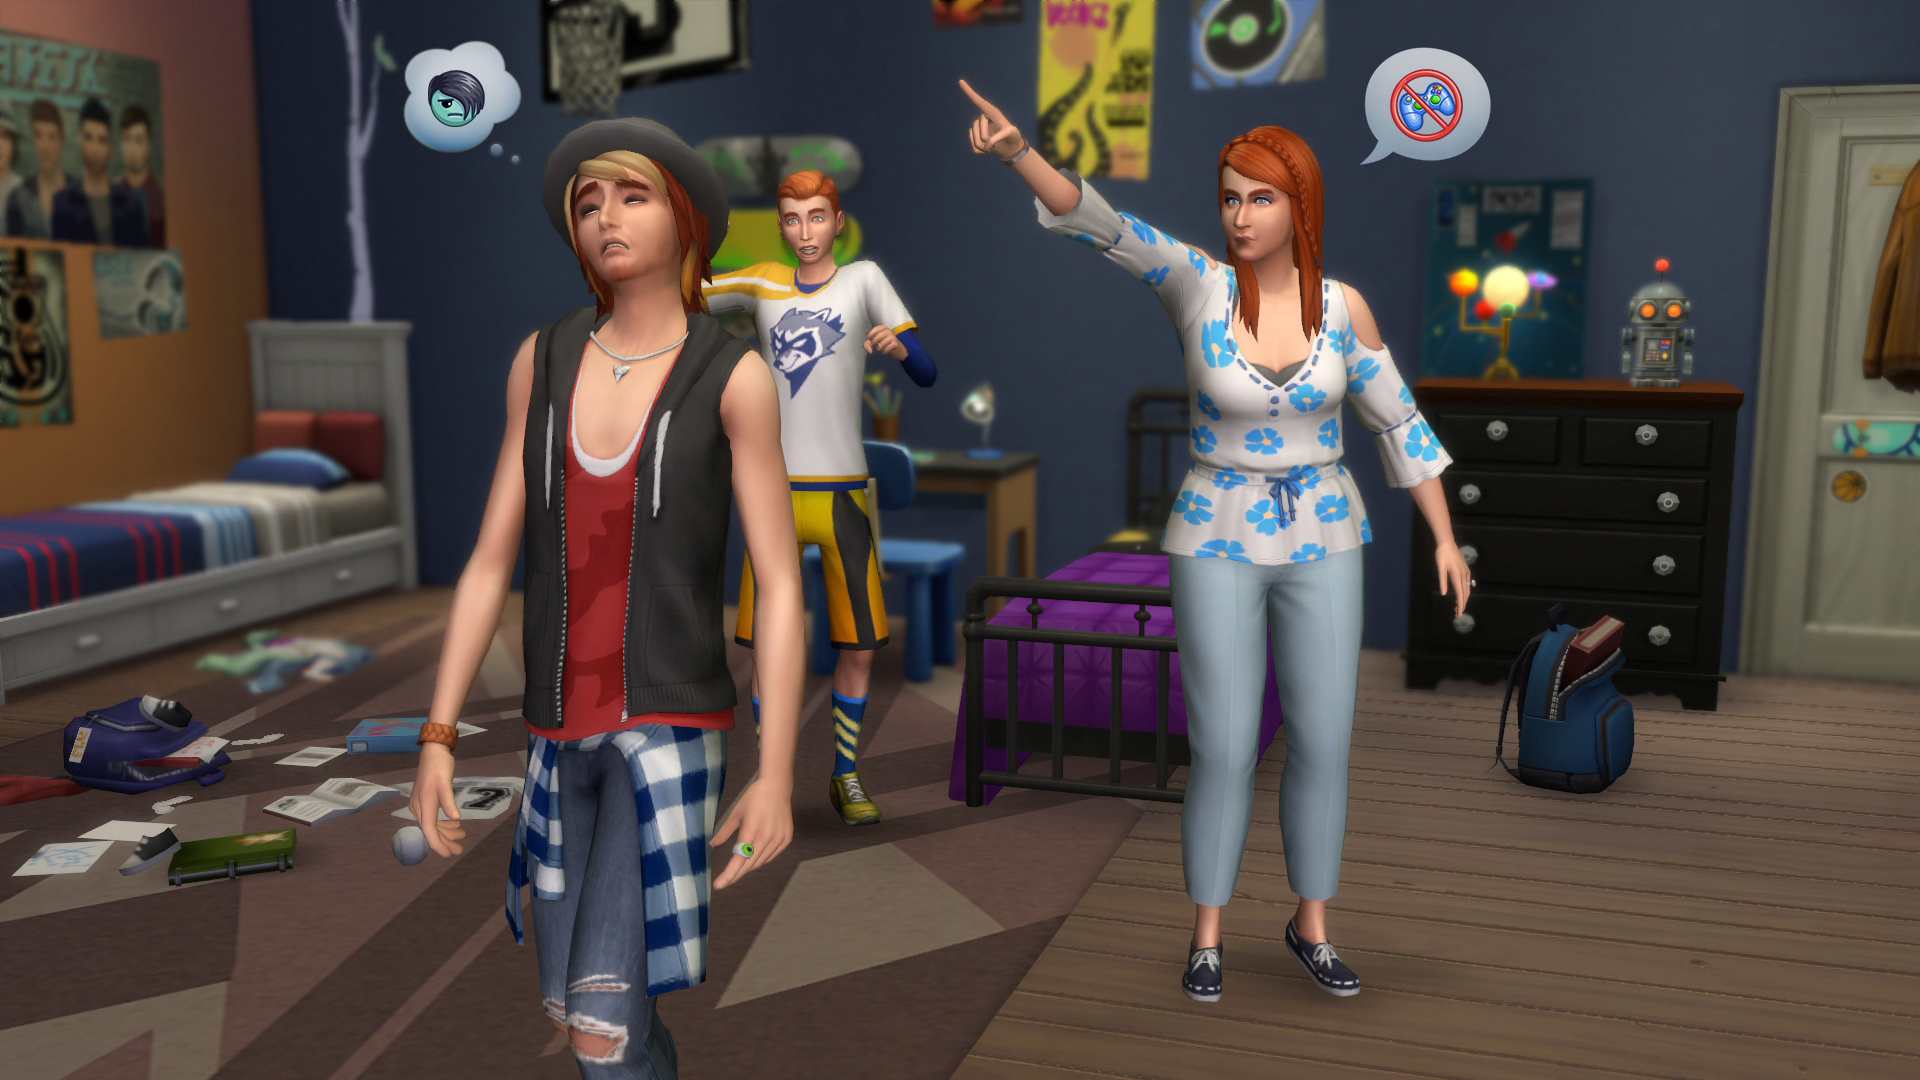 The Sims 4 Parenthood: Character values cheats, traits & more